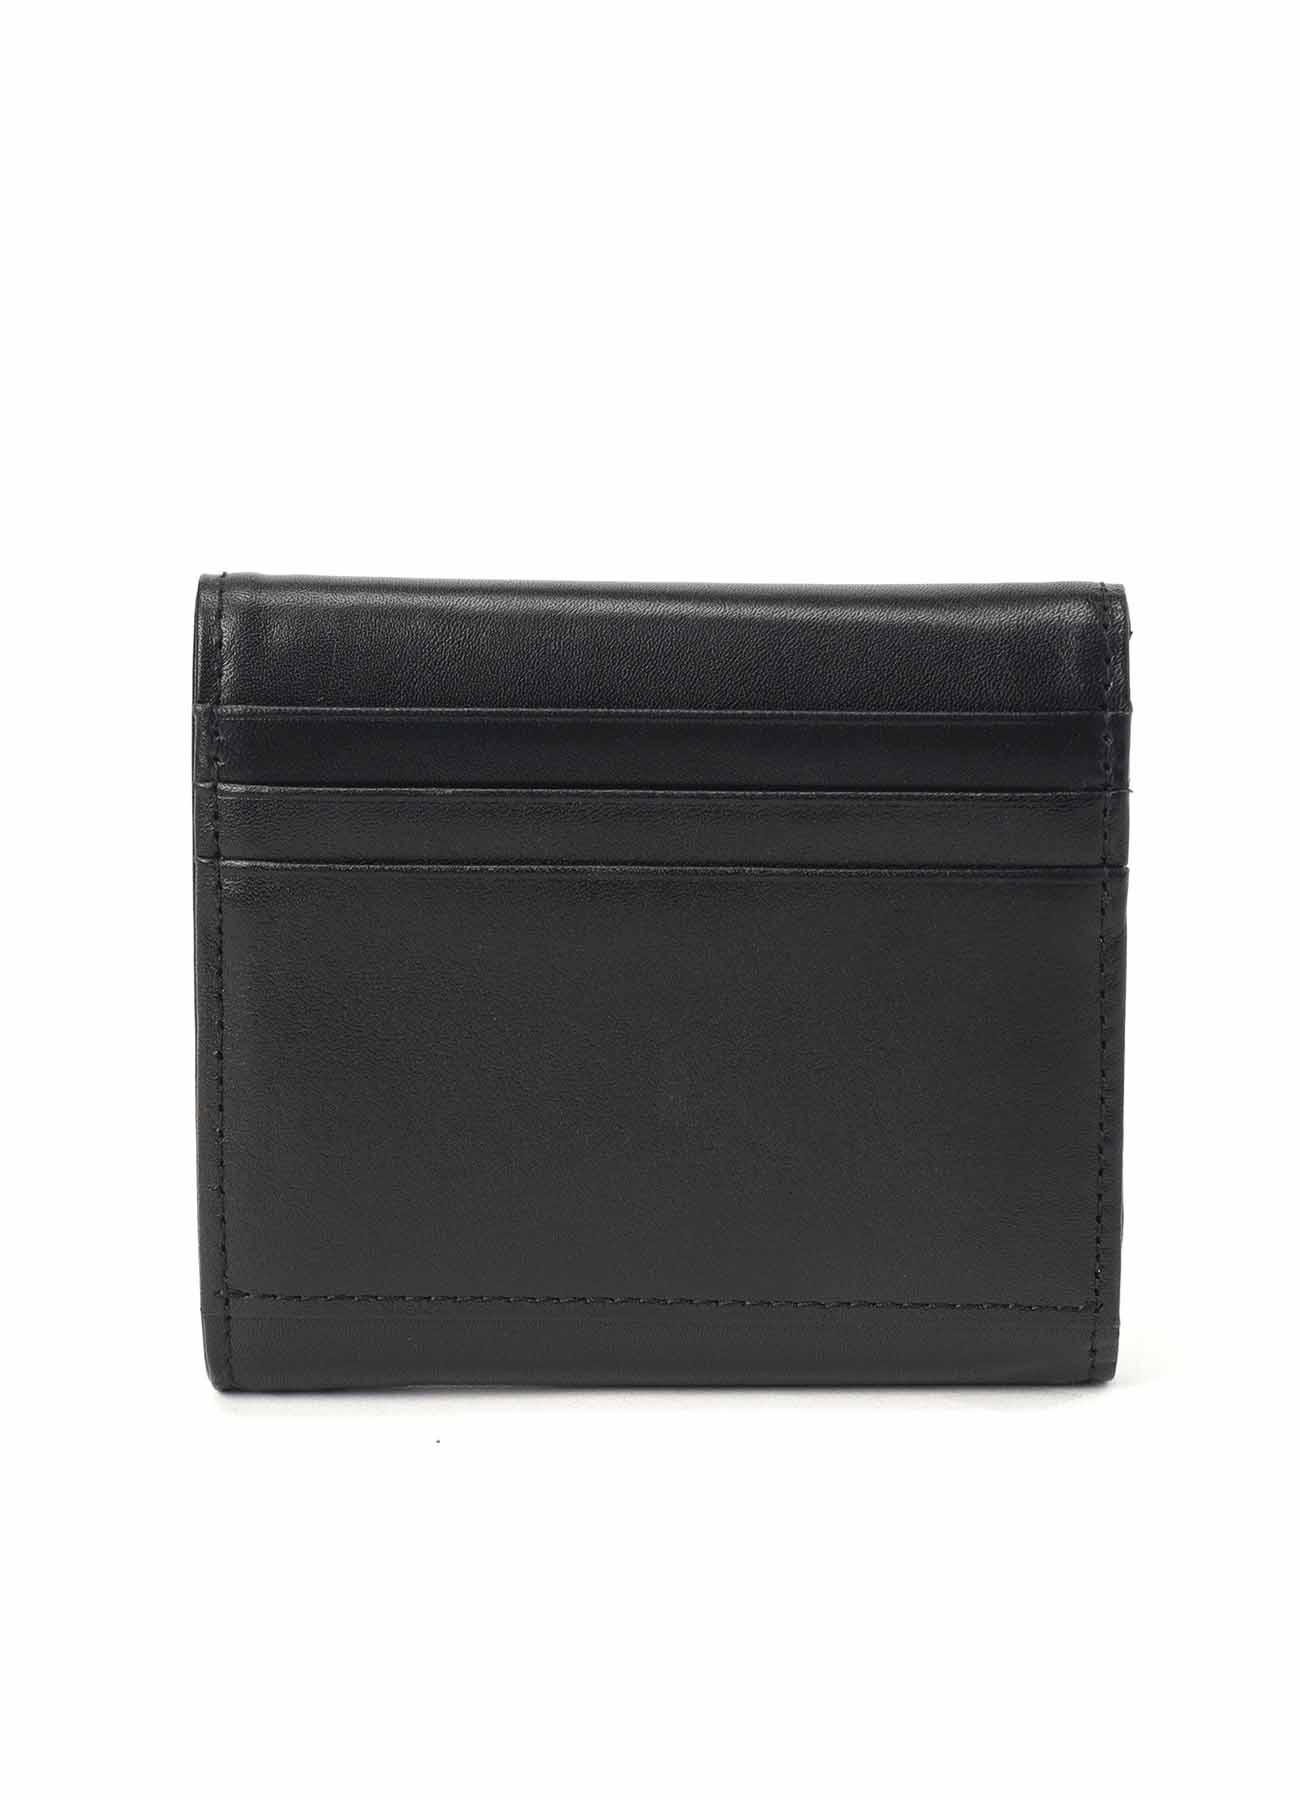 SEMI-GLOSS SMOOTH LEATHER WALLET